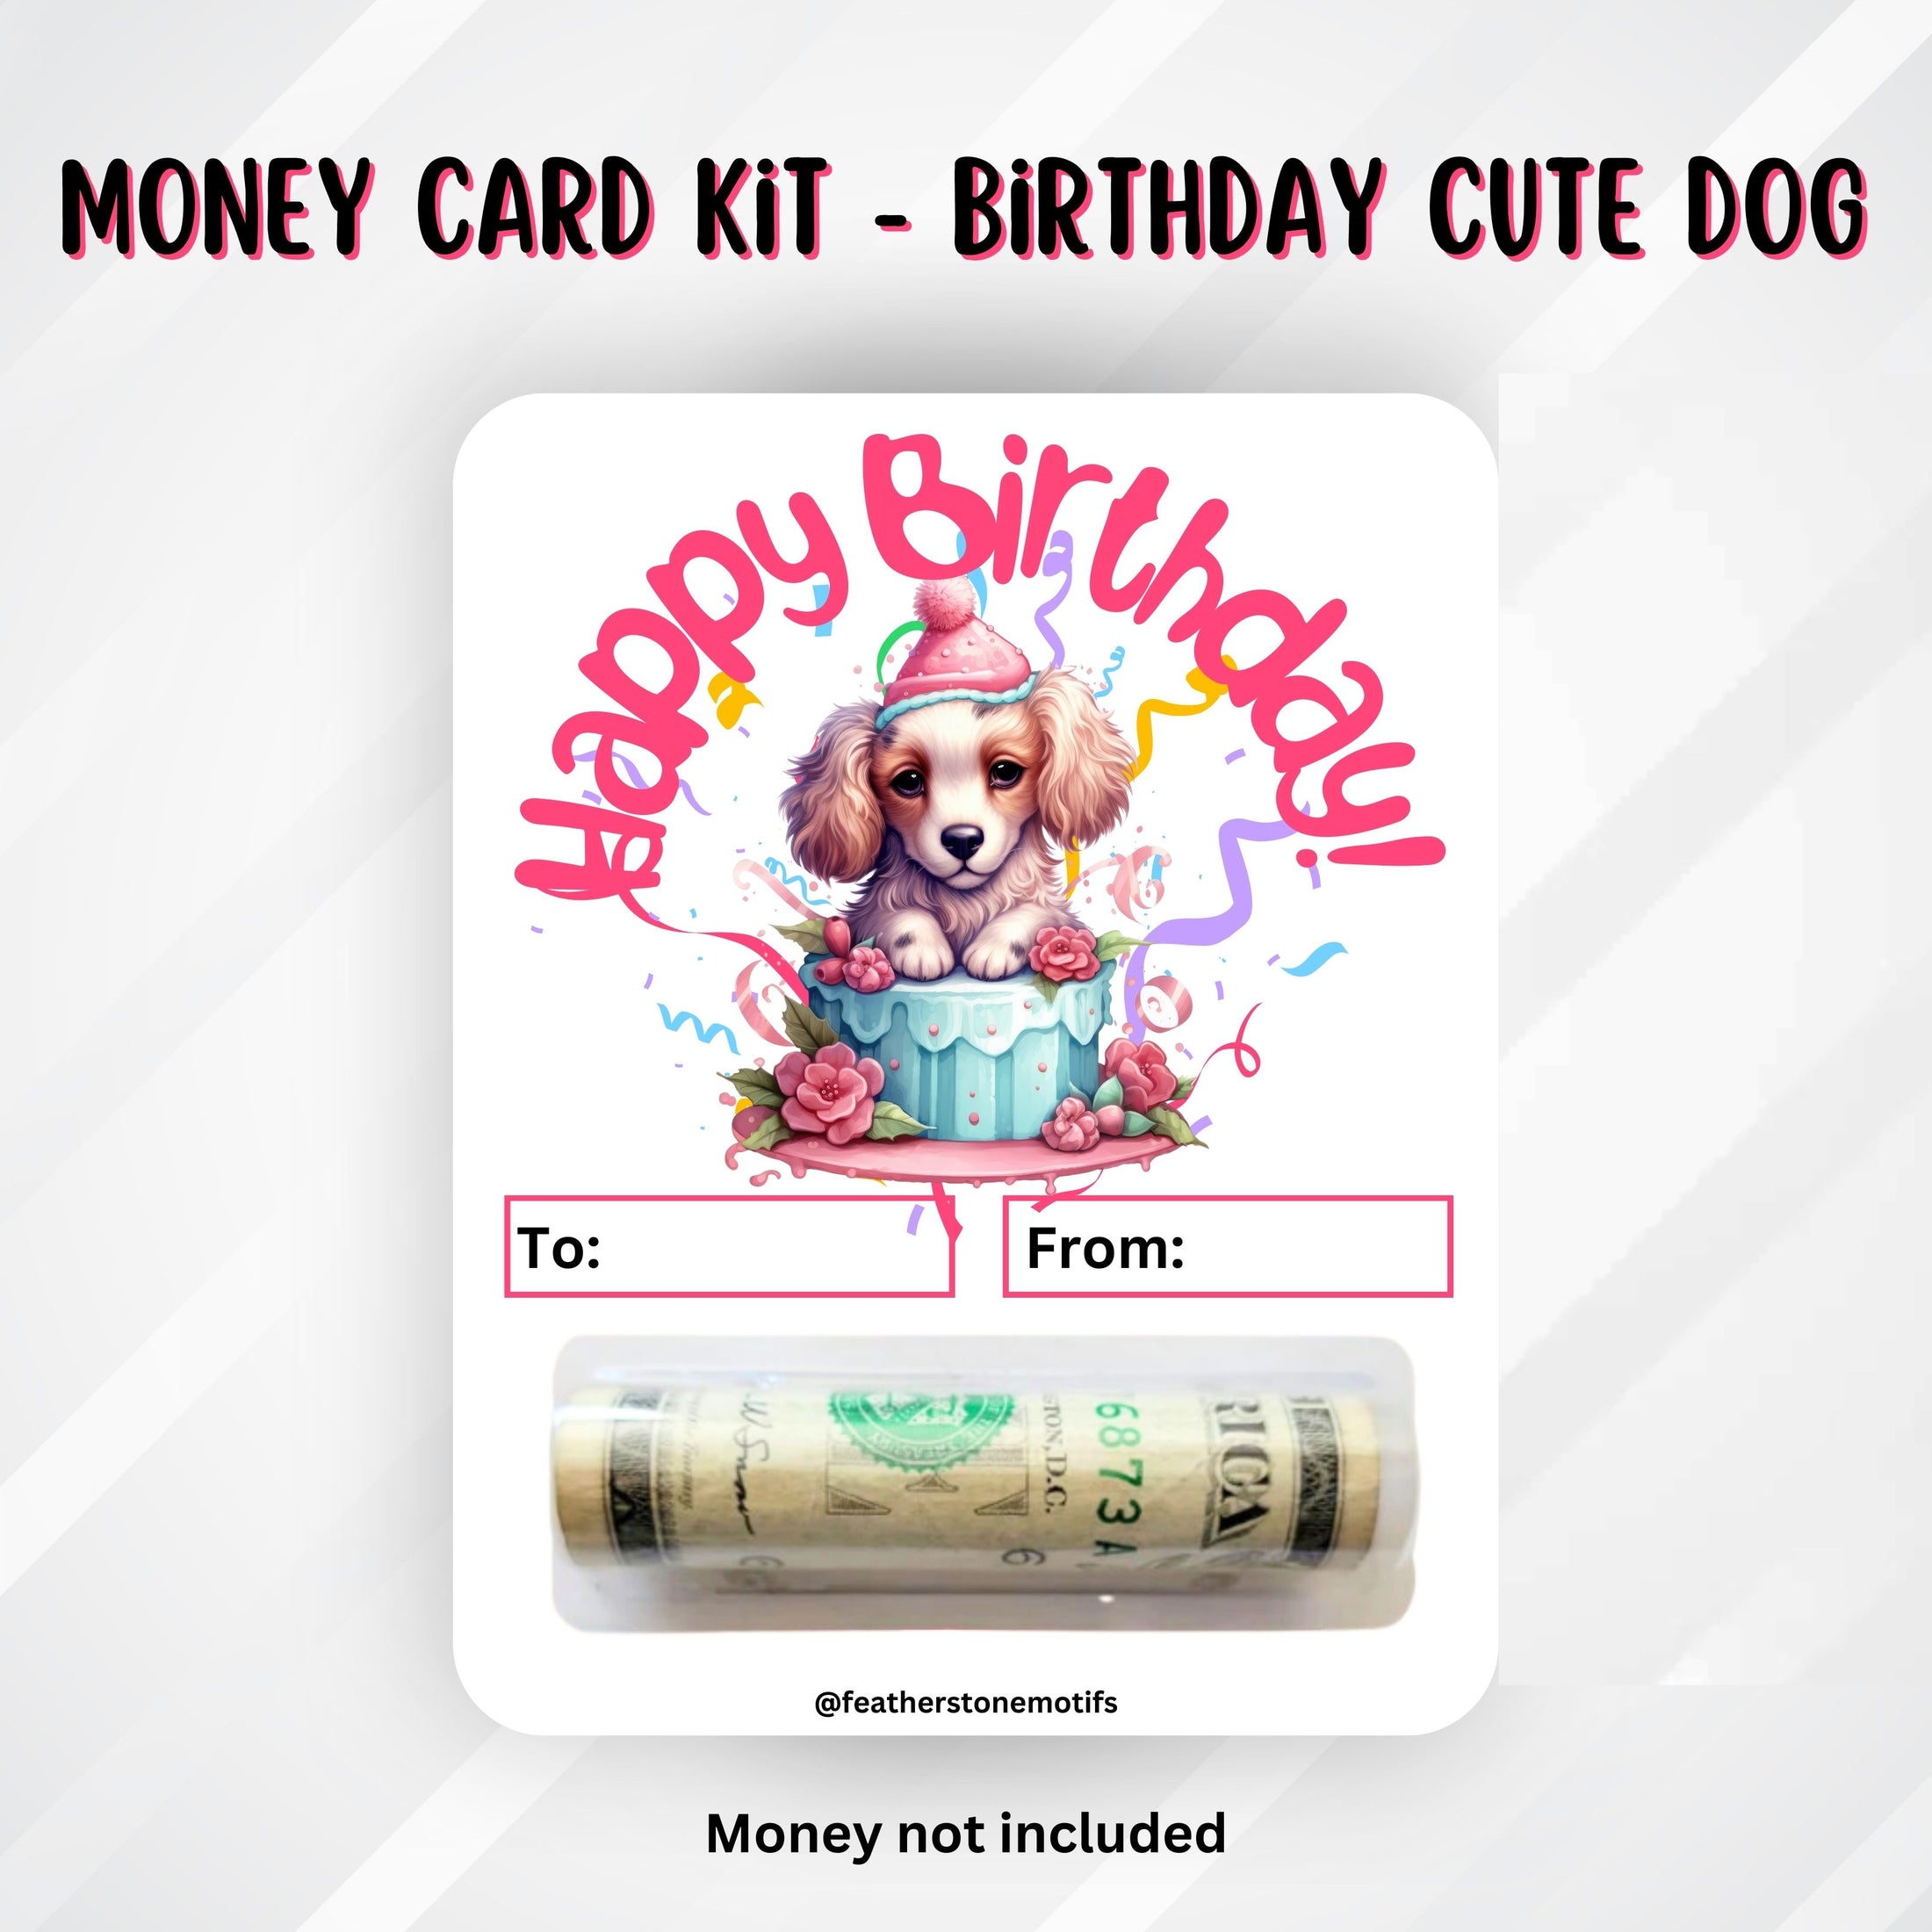 This image shows the money tube attached to the Cute Dog Birthday money card.